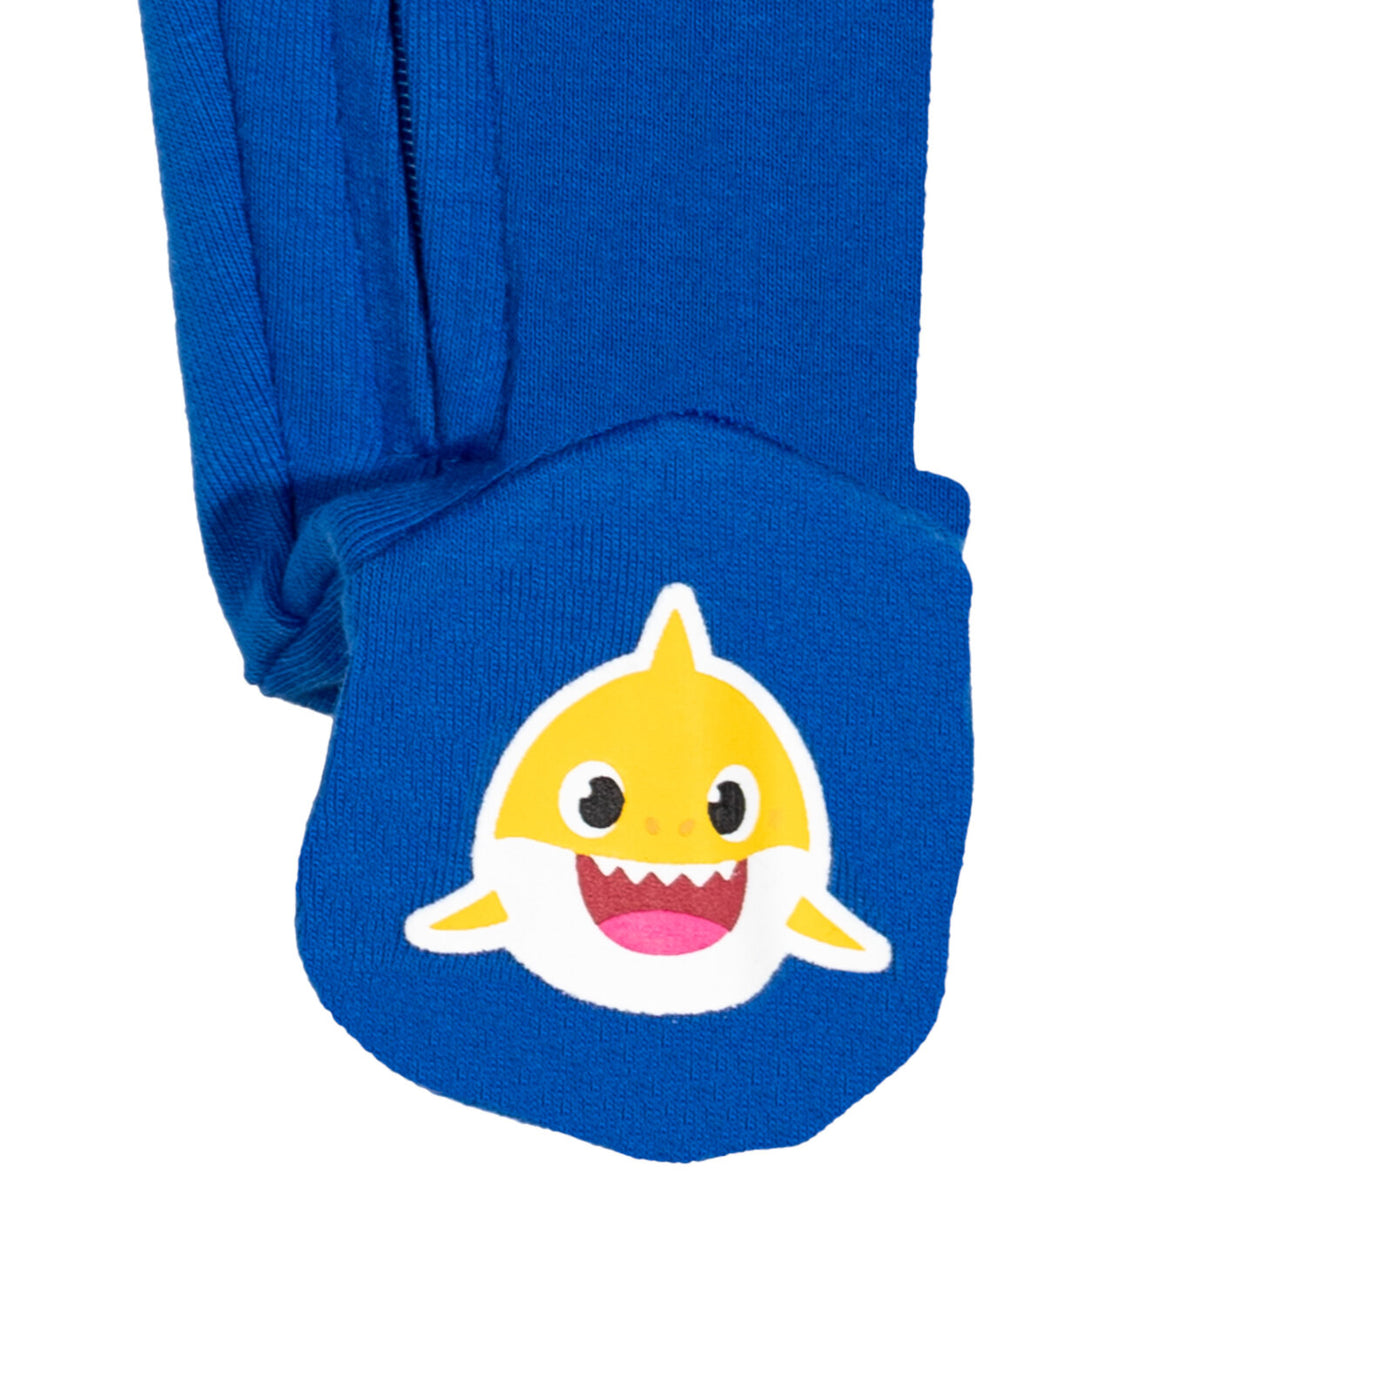 Pinkfong Baby Shark 2 Pack Zip Up Sleep N' Play Coveralls